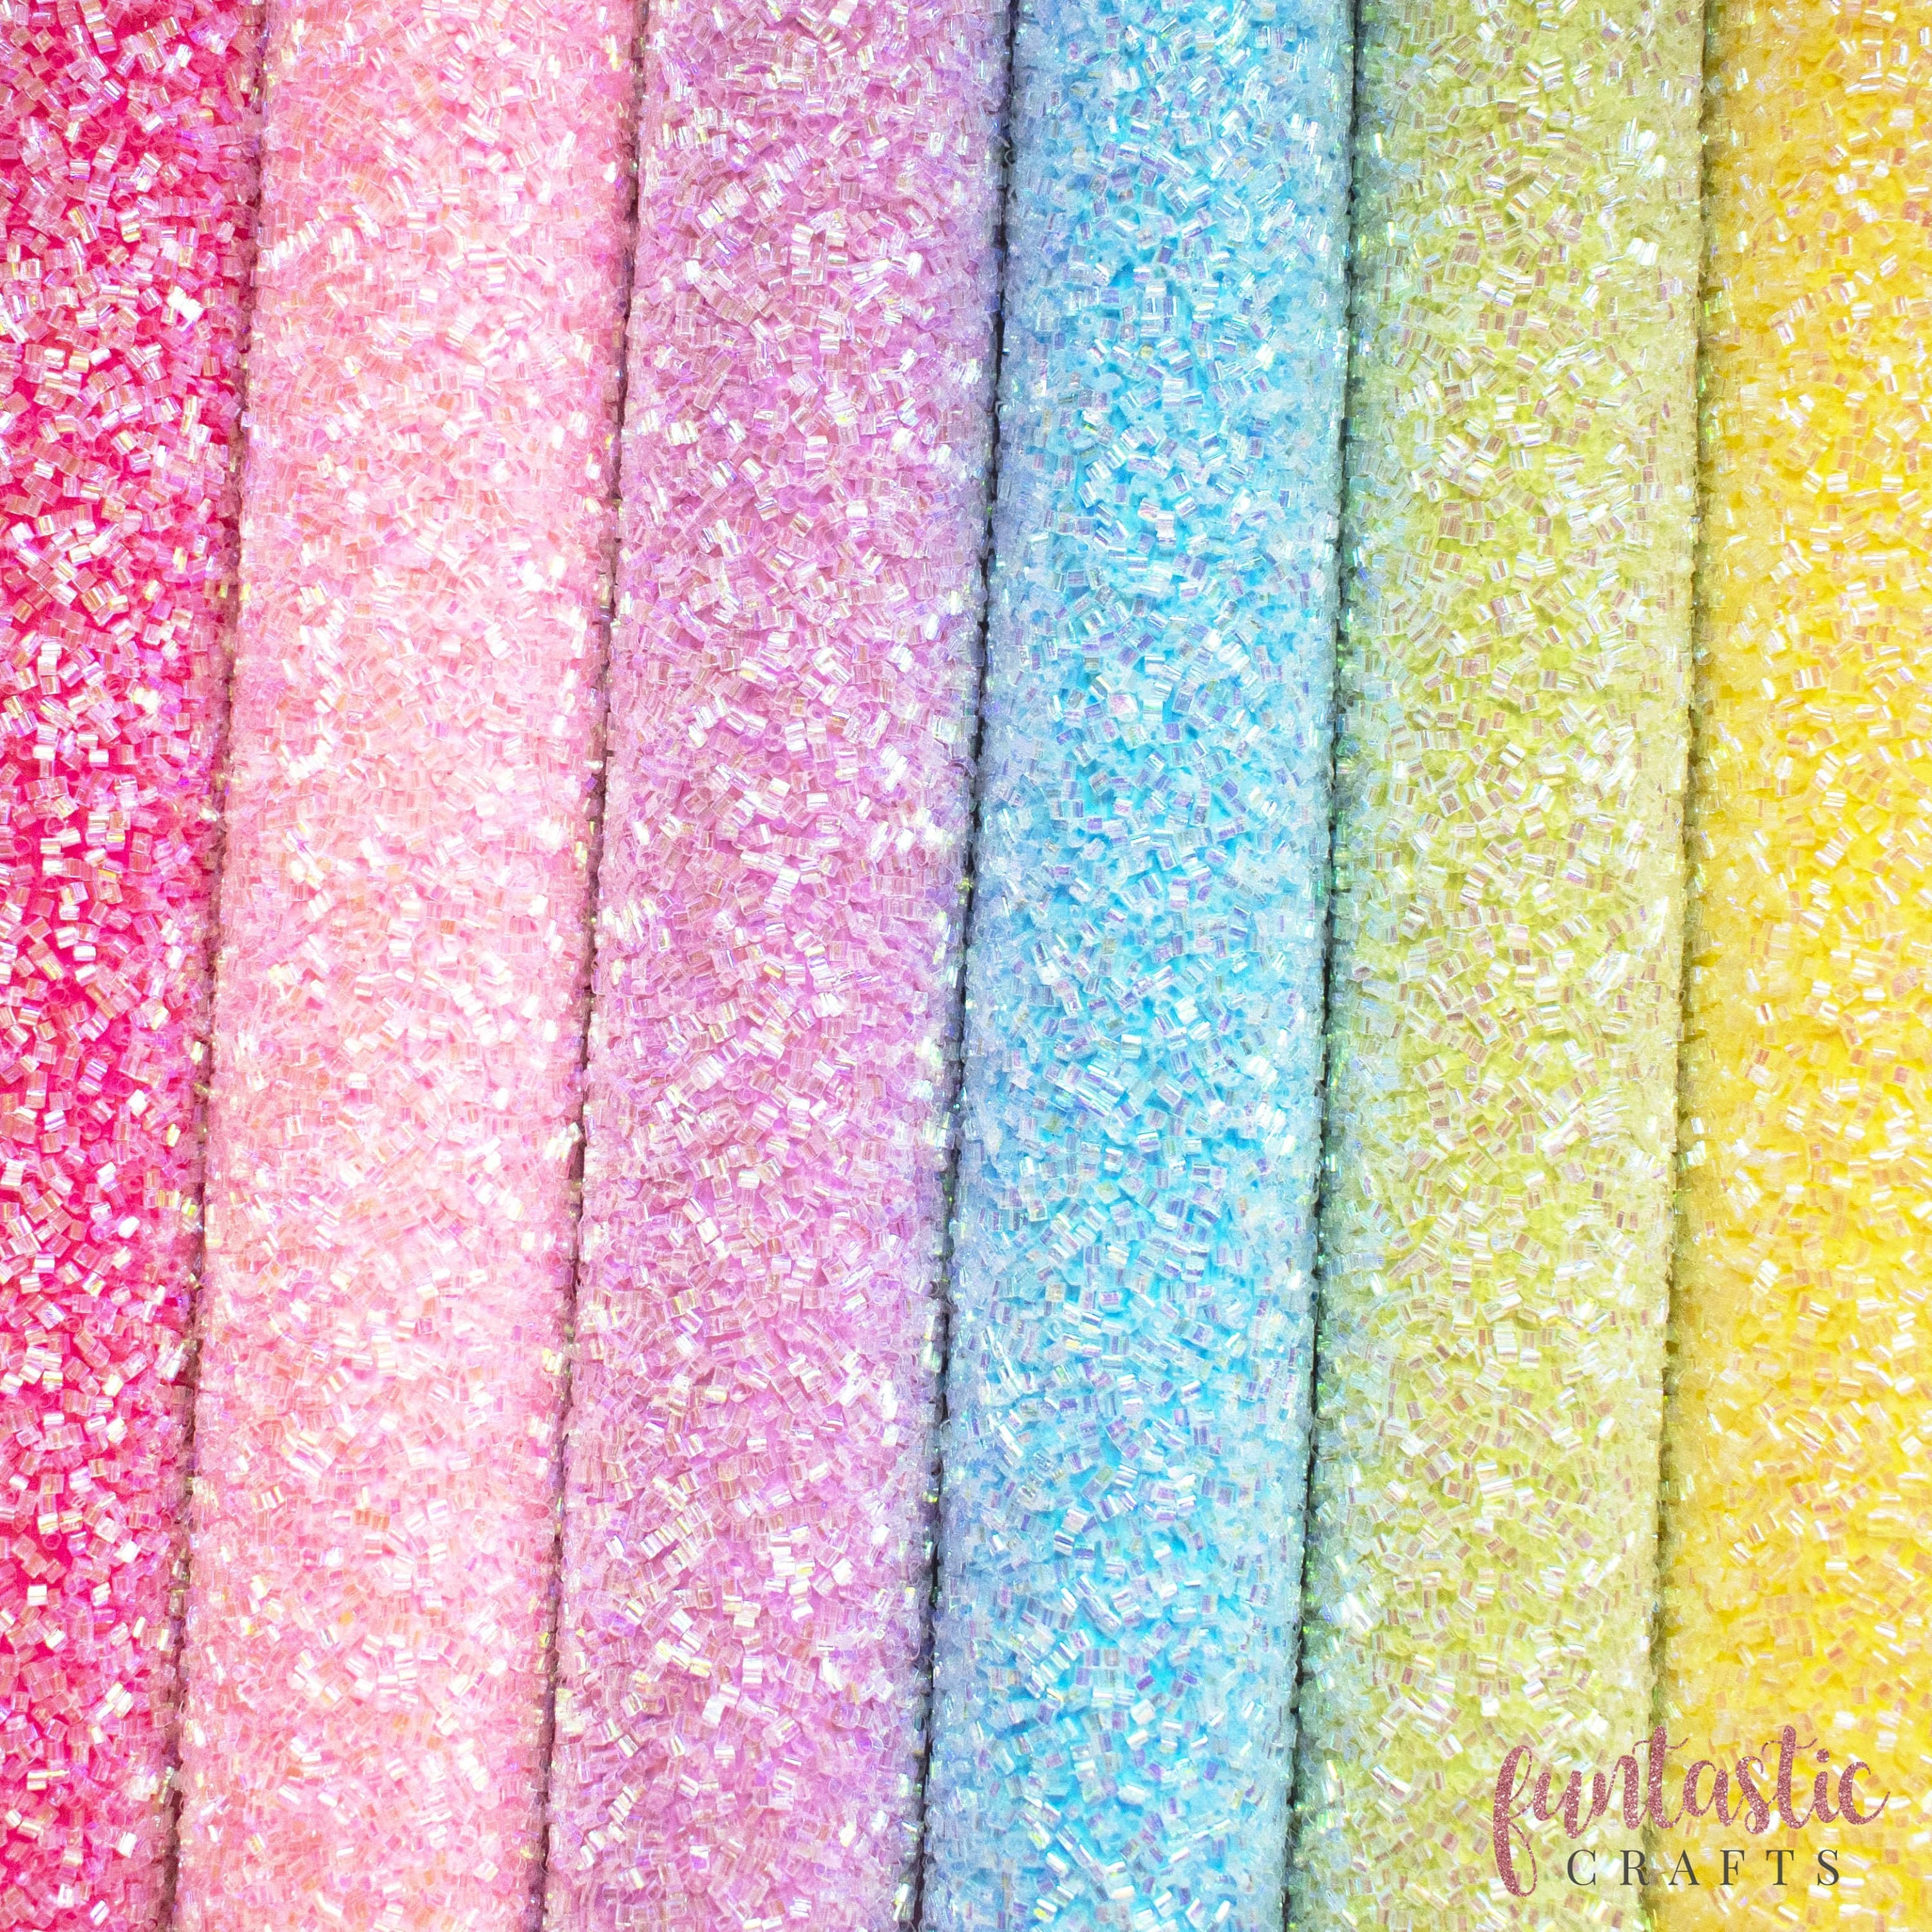 Iridescent Chunky Glitter Fabric A4 Sheets - Premium Quality